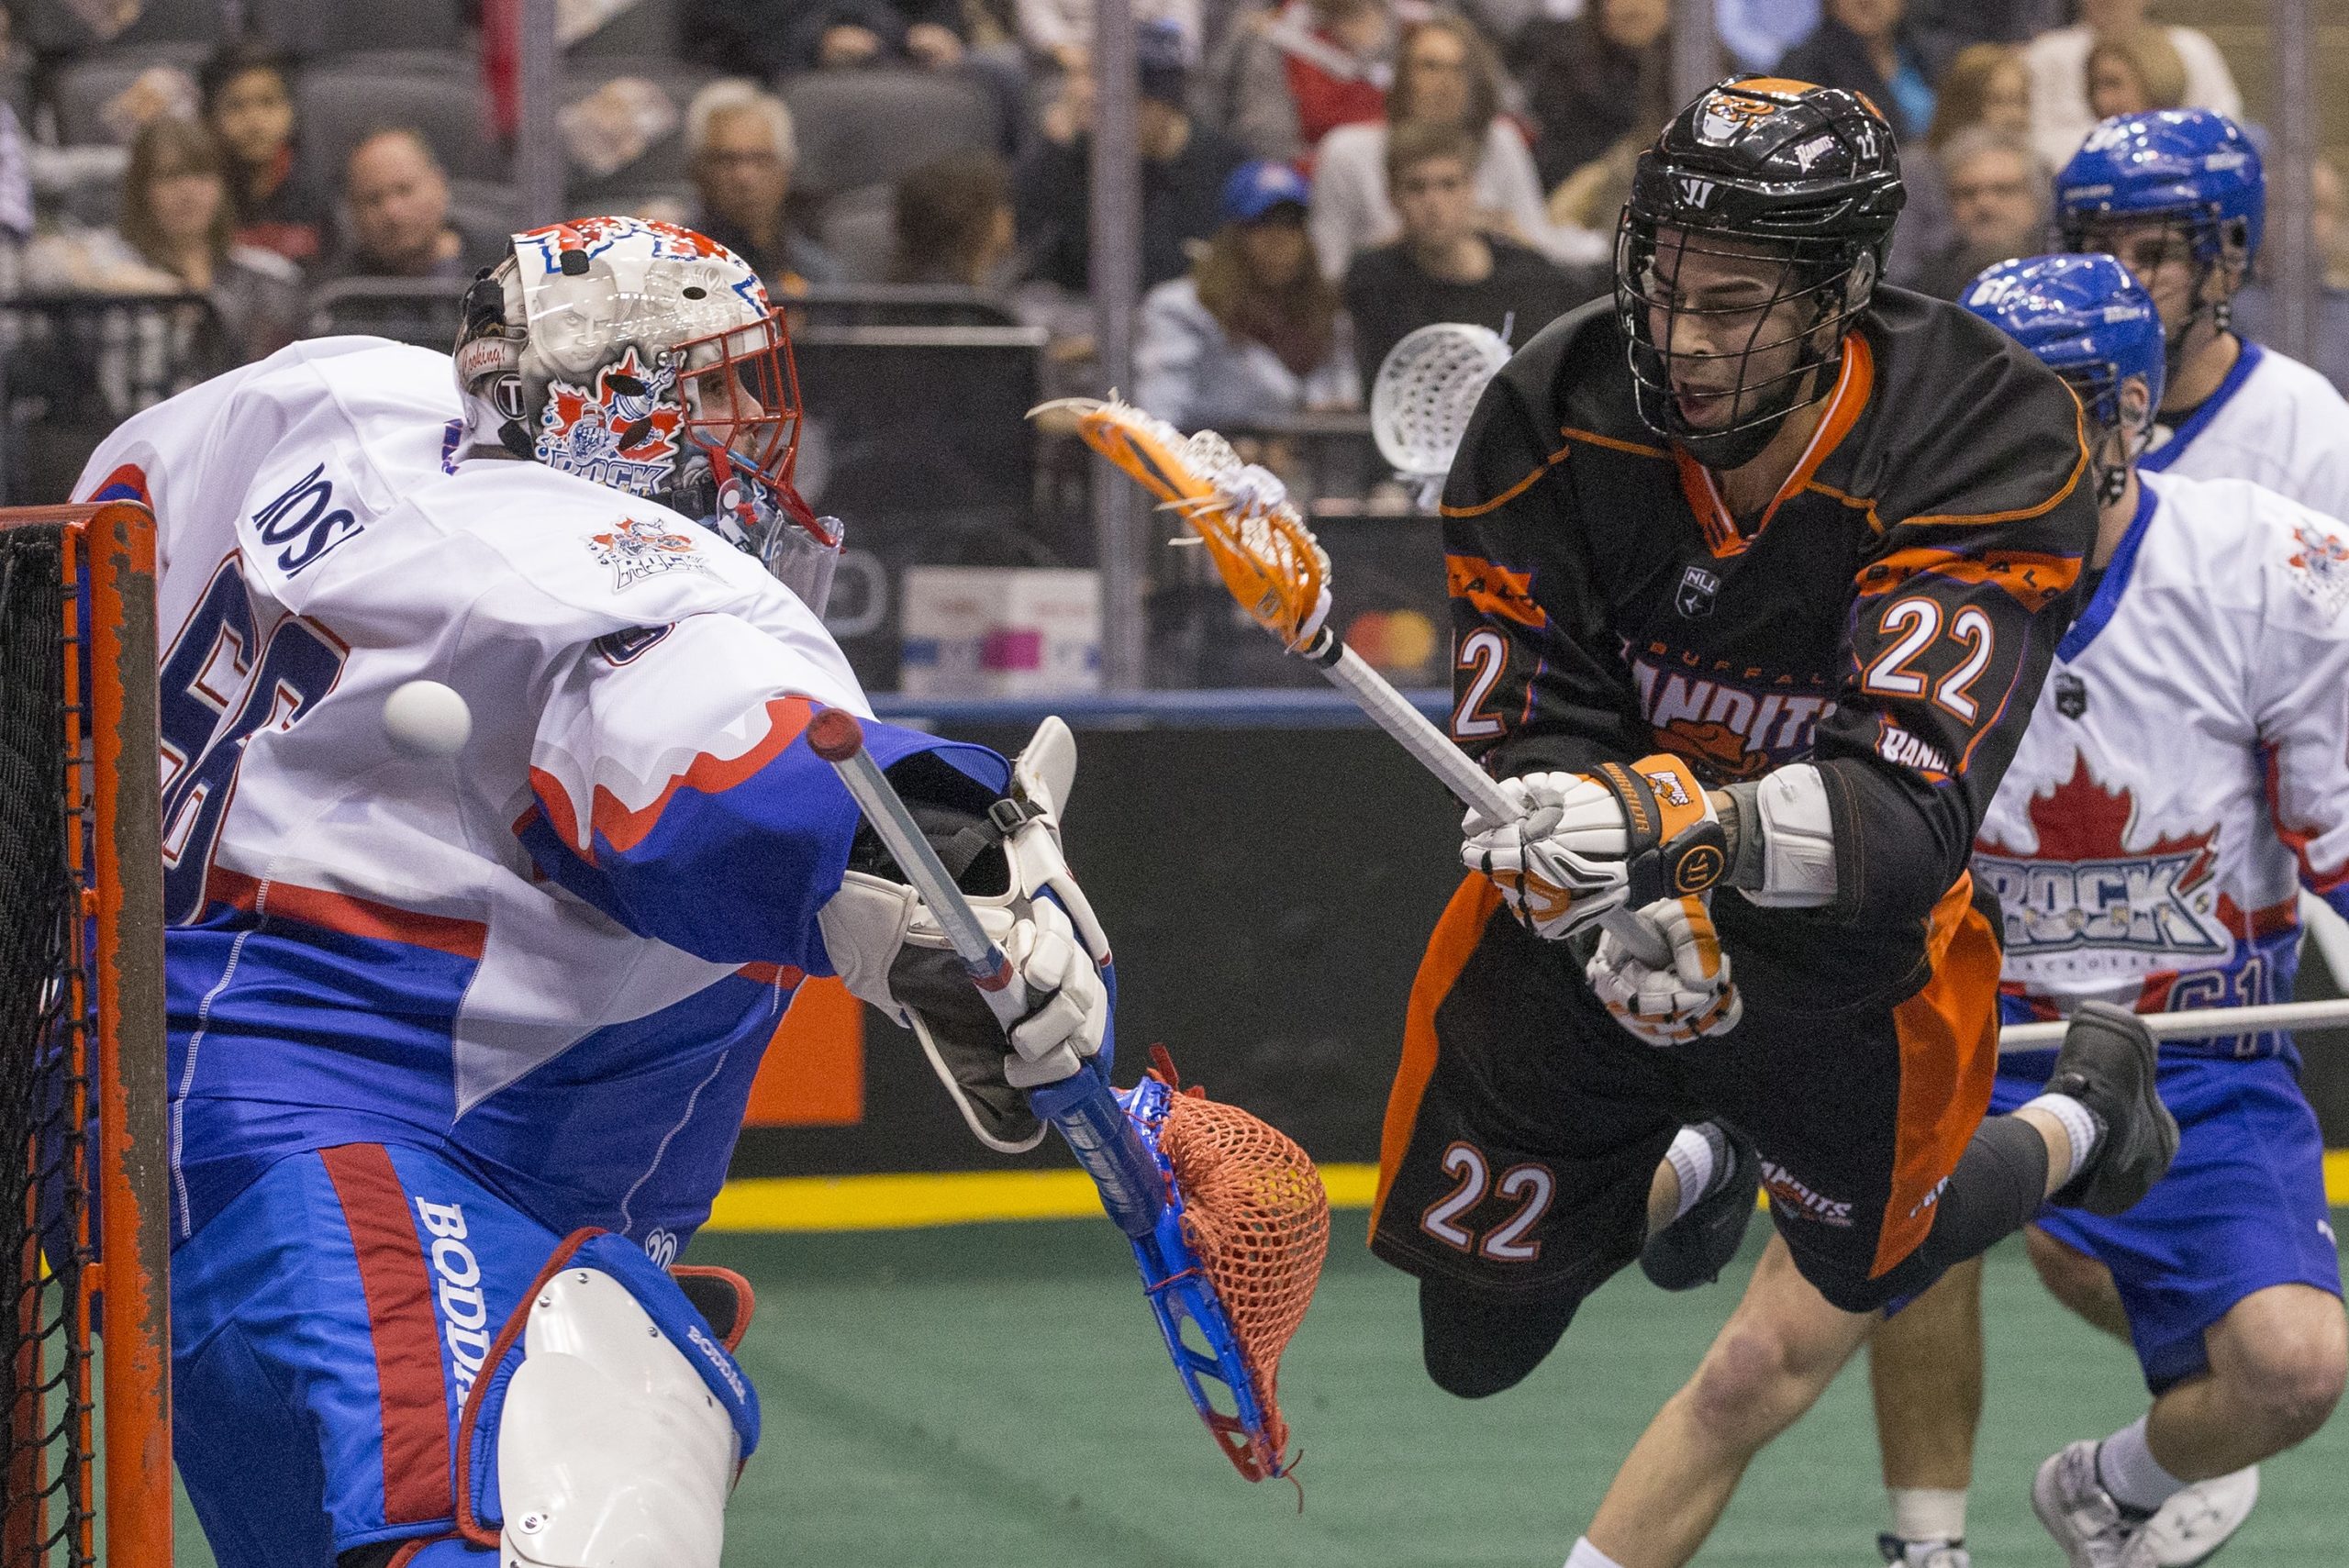 Nationwide Lacrosse League continues sponsorship streak with AT&T deal